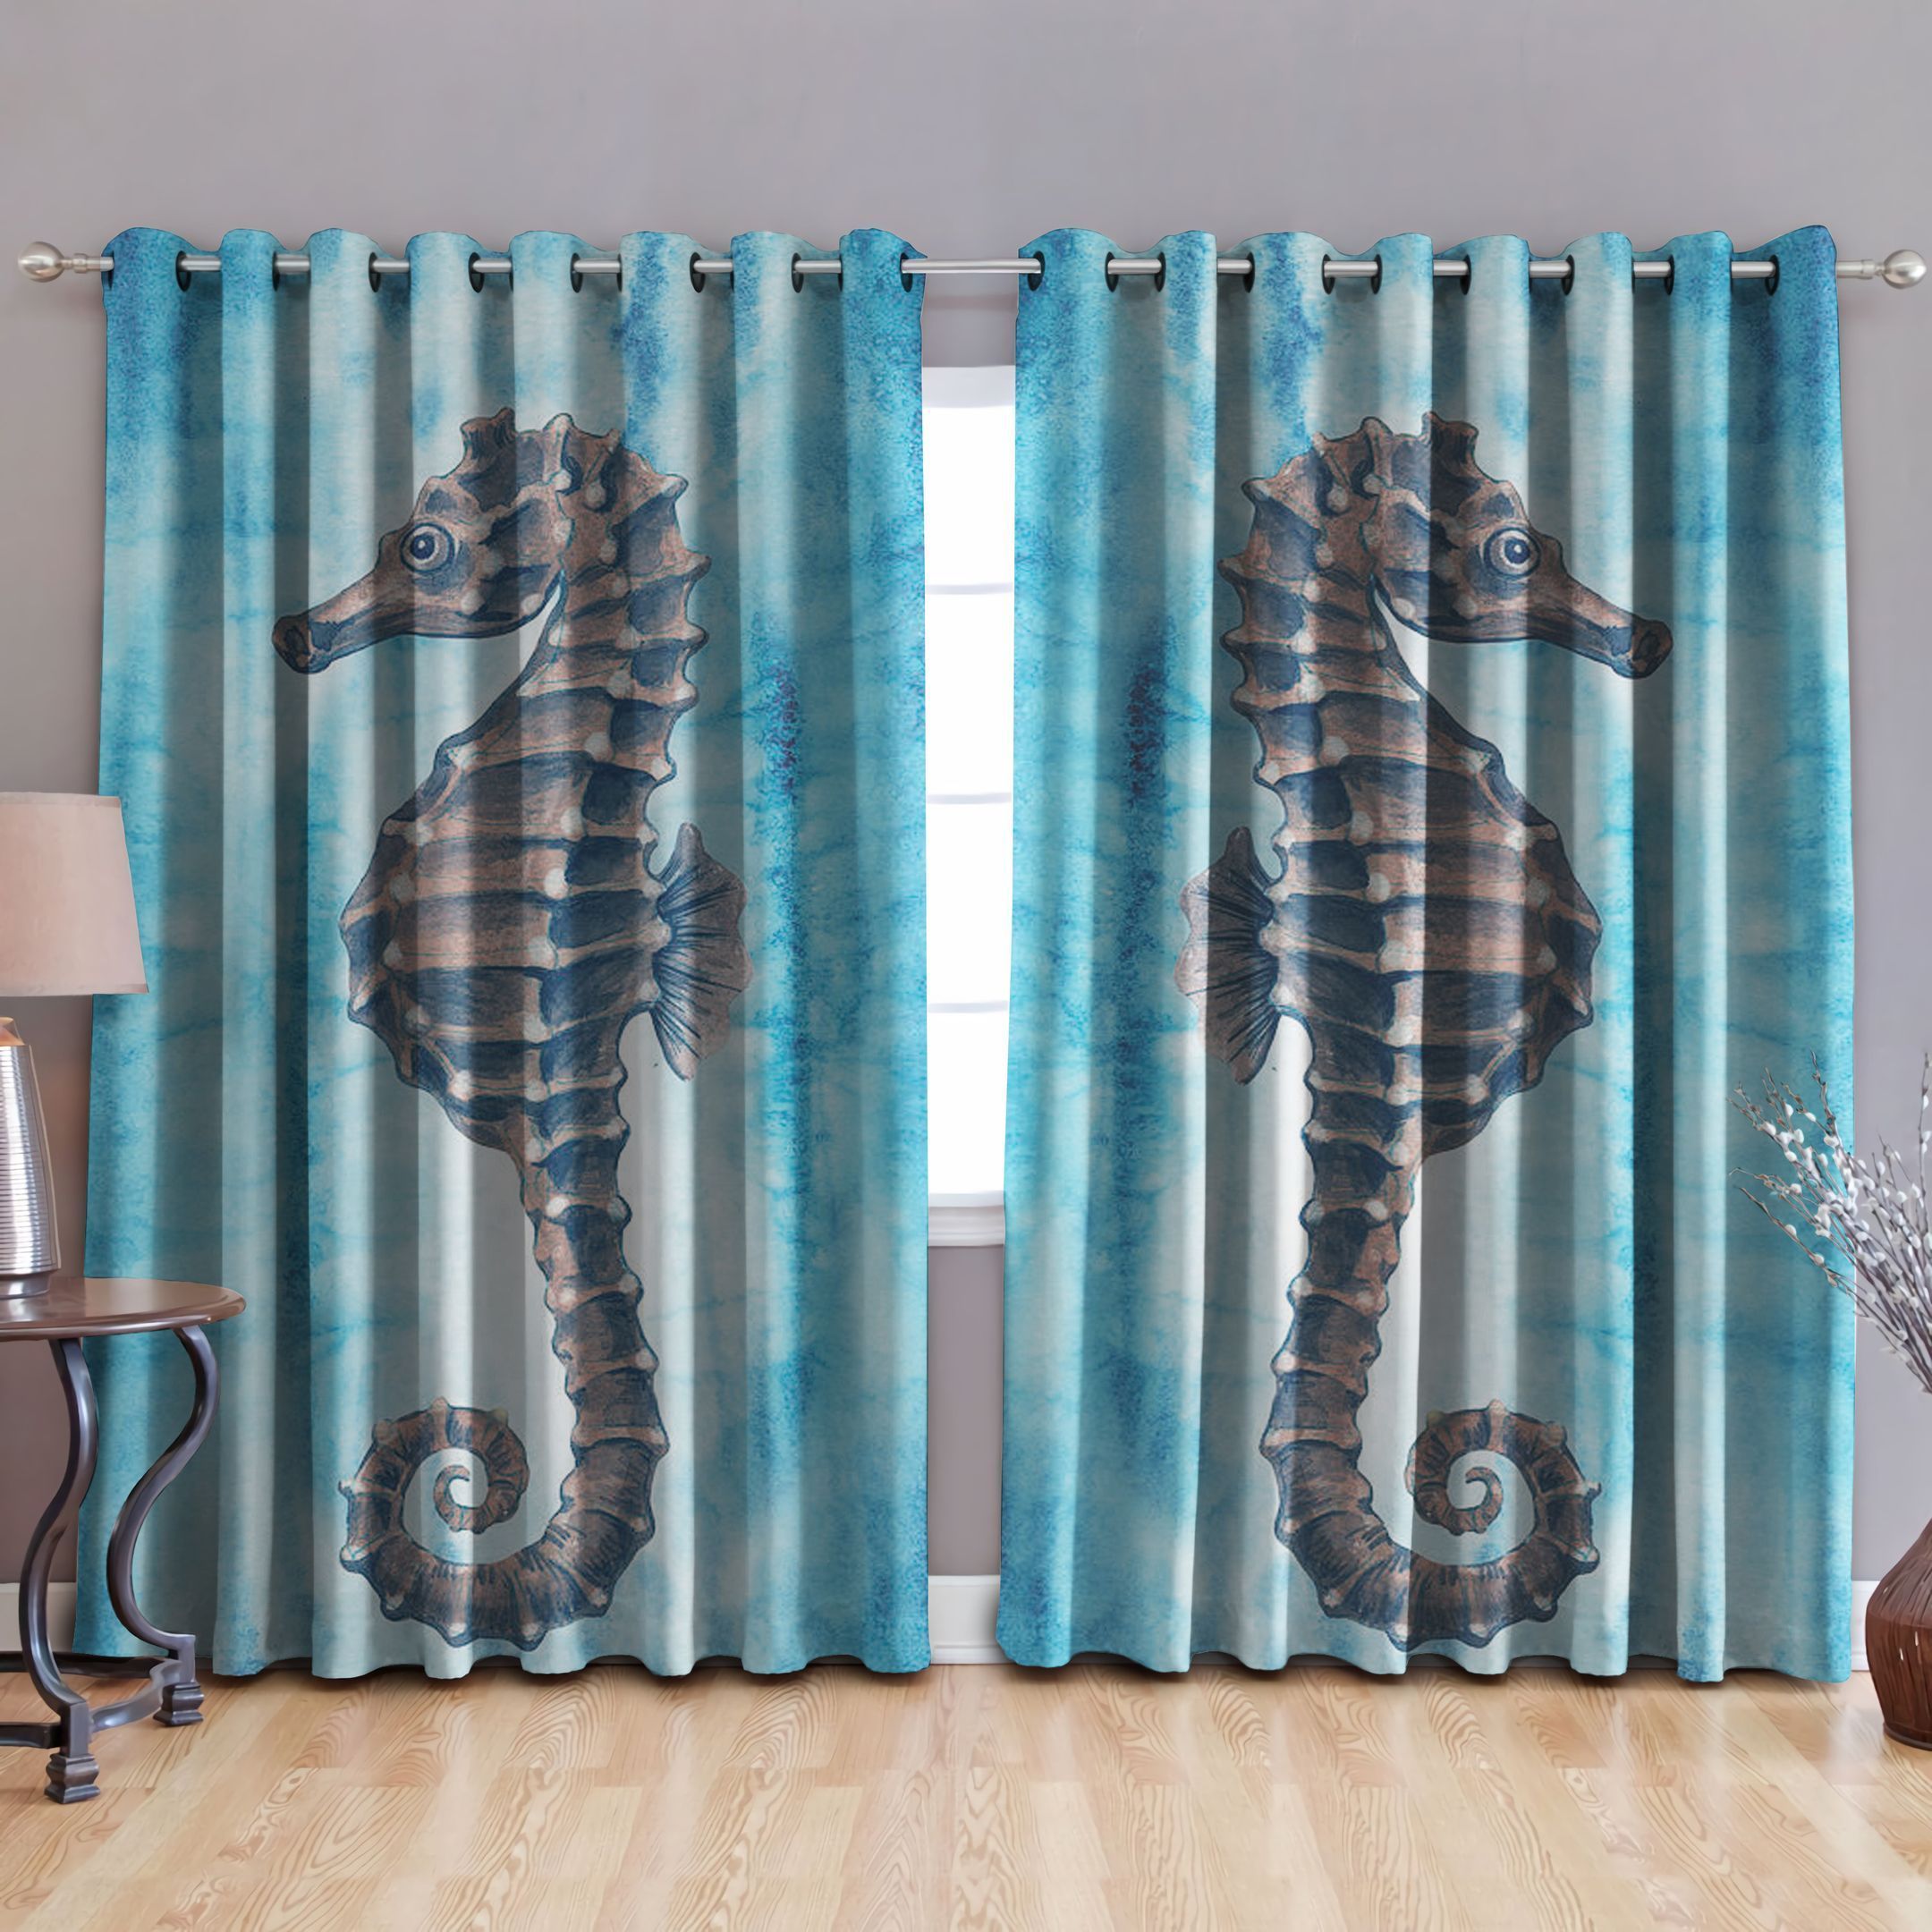 Seahorse Blue And White Marble Printed Window Curtain Home Decor